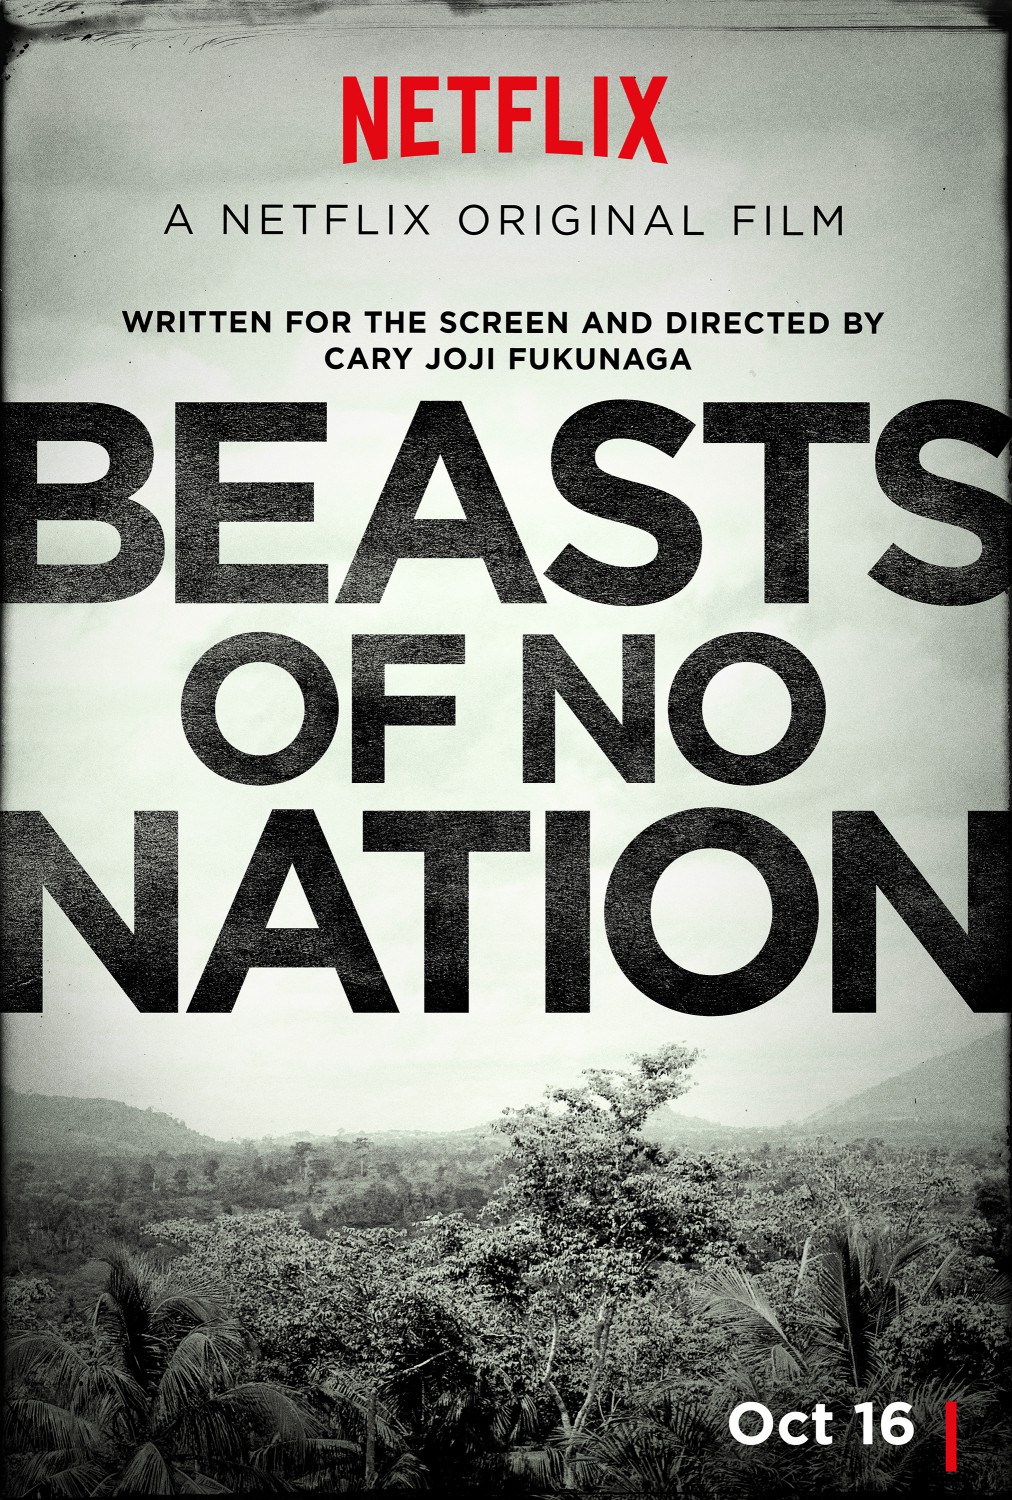 Beasts-of-No-Nation-Poster-1.jpg